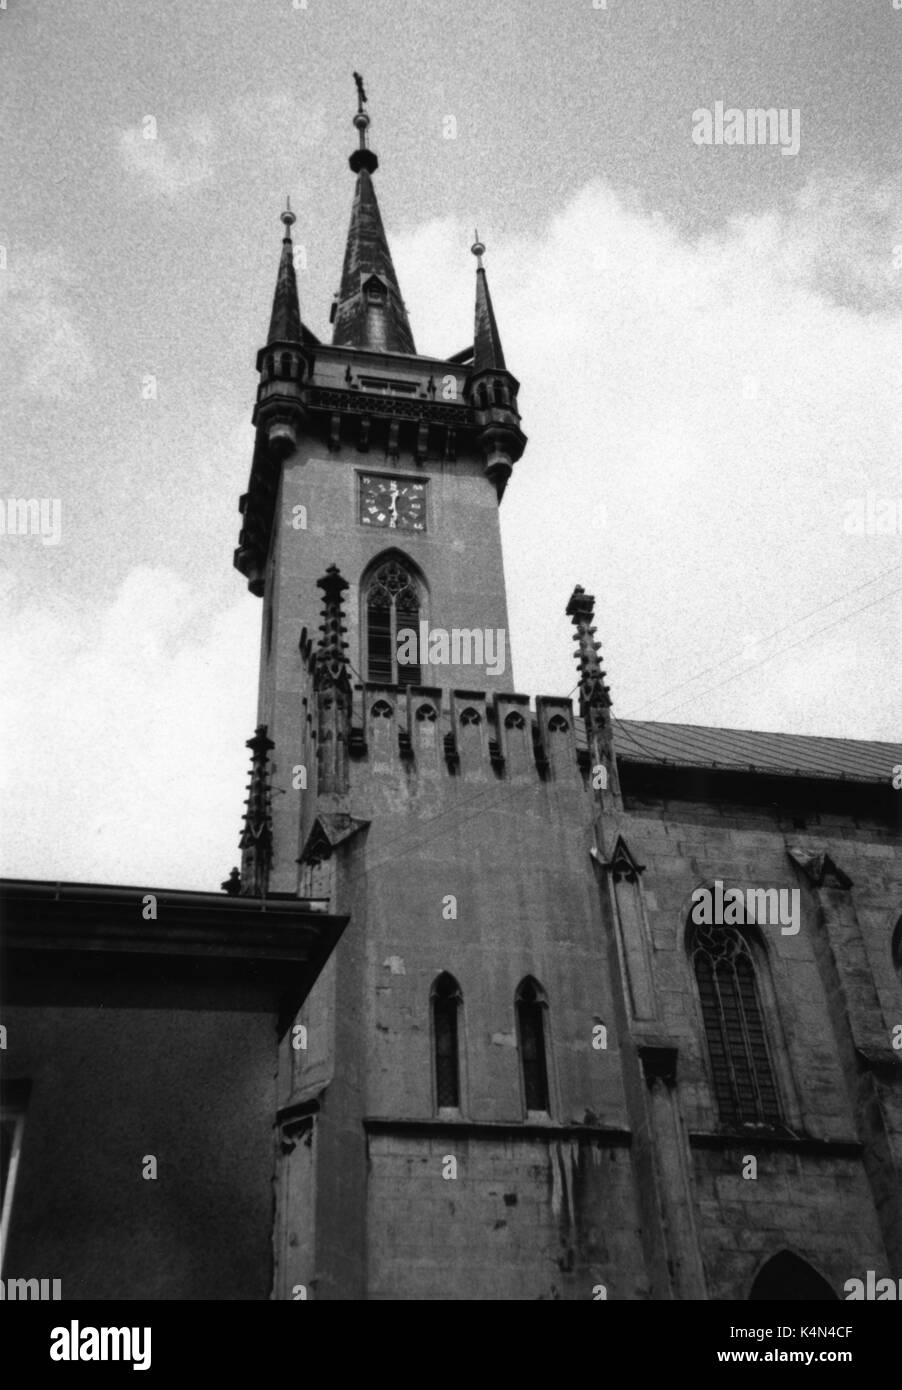 Bohuslav Martinu - The tower of St. James' Church in Policka where he was born. BM: Czech composer, b. December 8, 1890 – August 28, 1959. Stock Photo